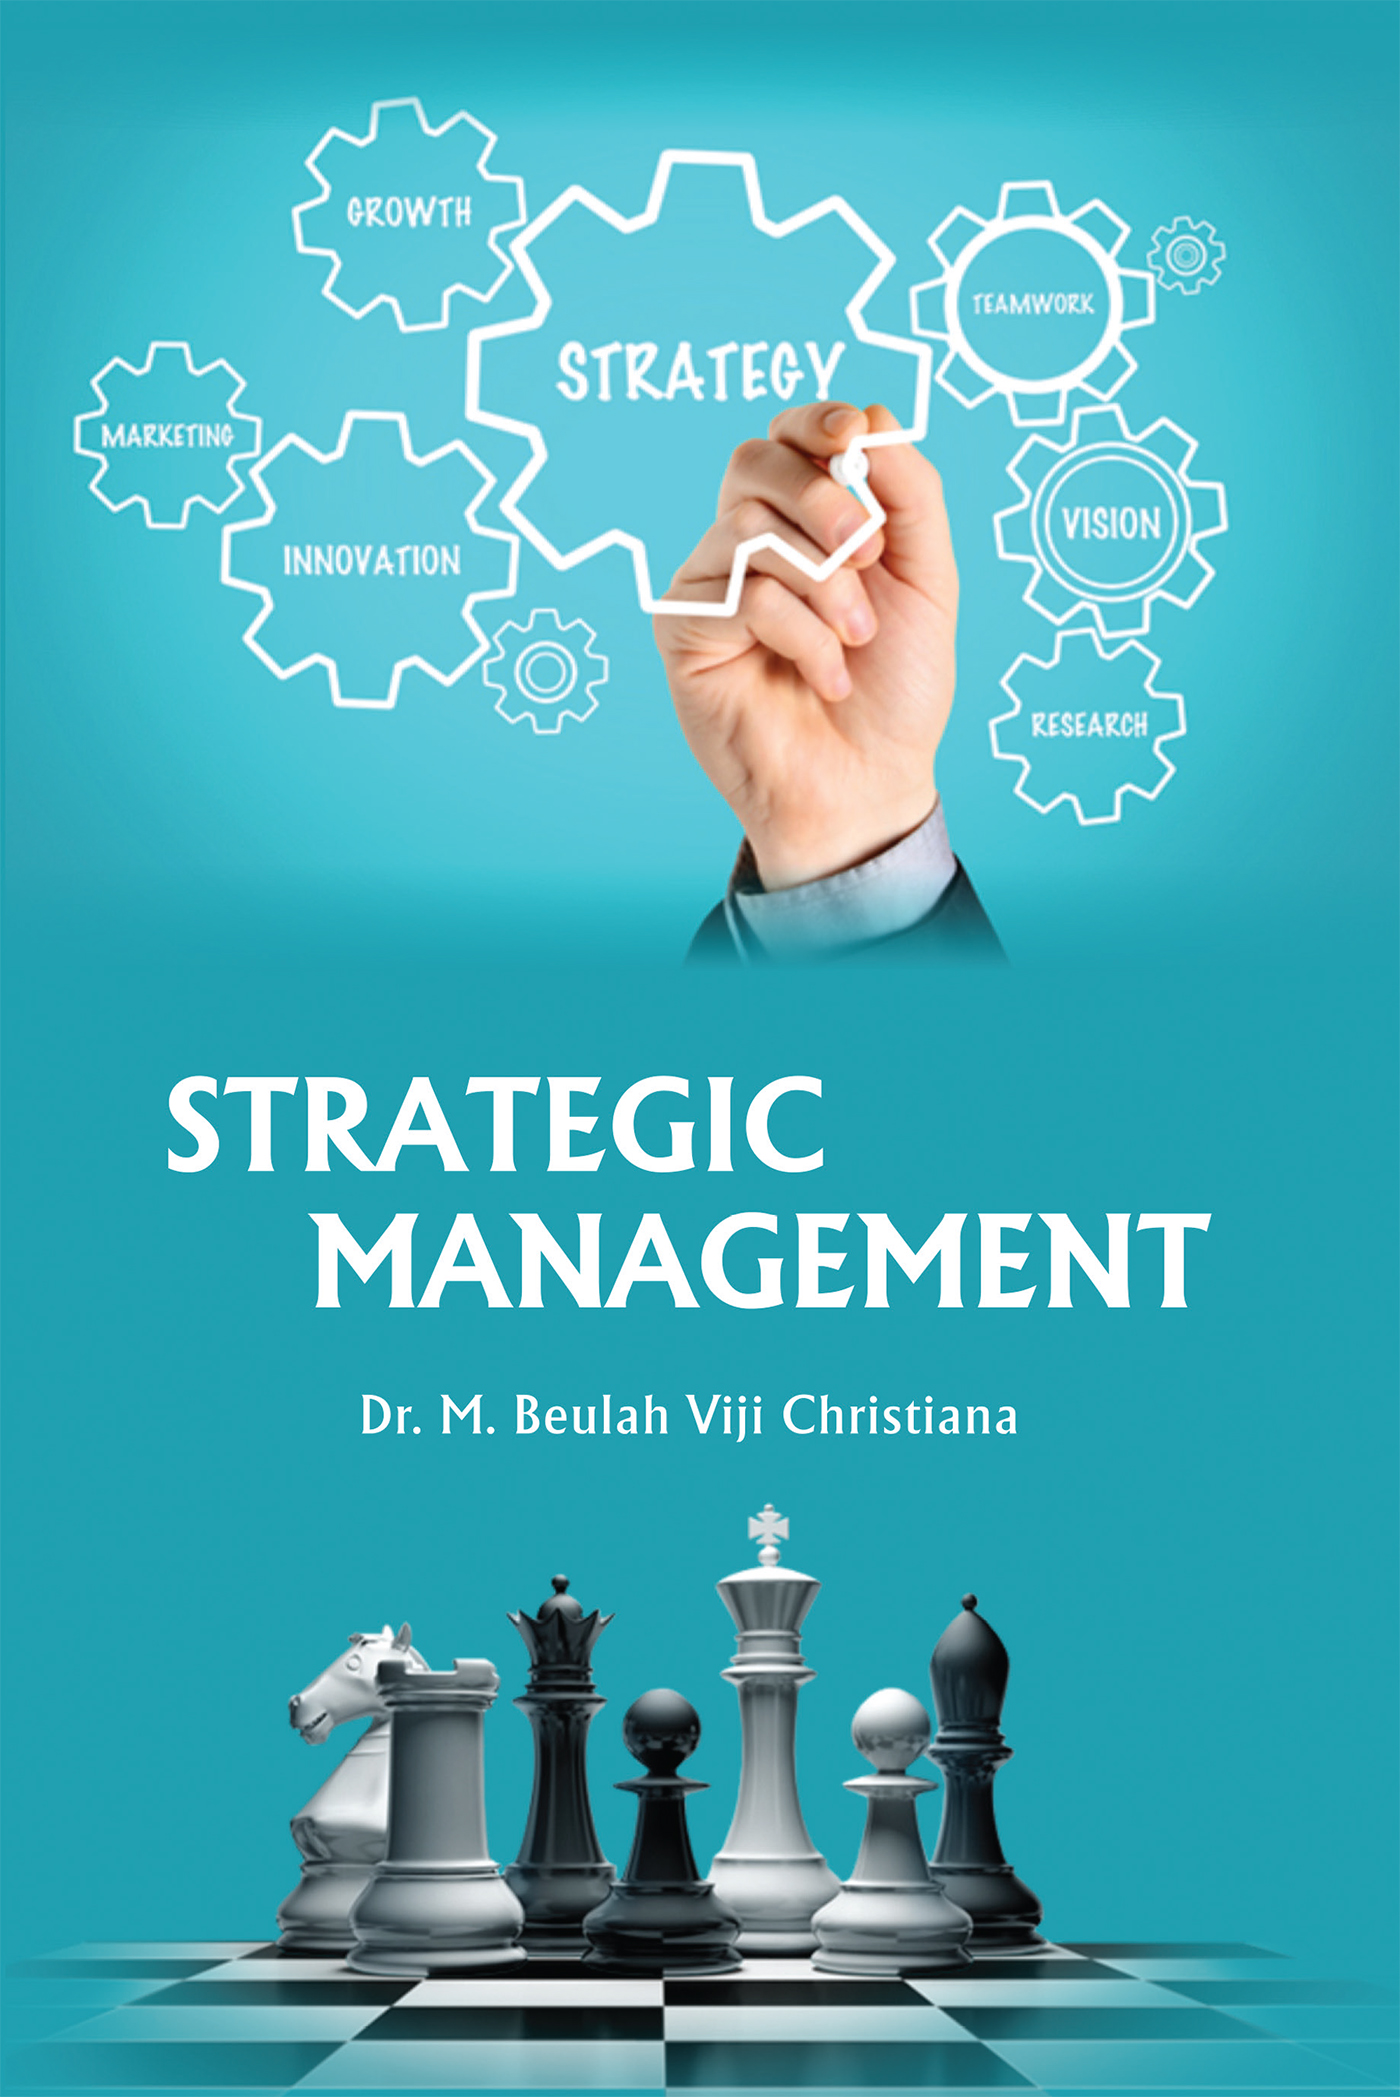 research articles on strategic management